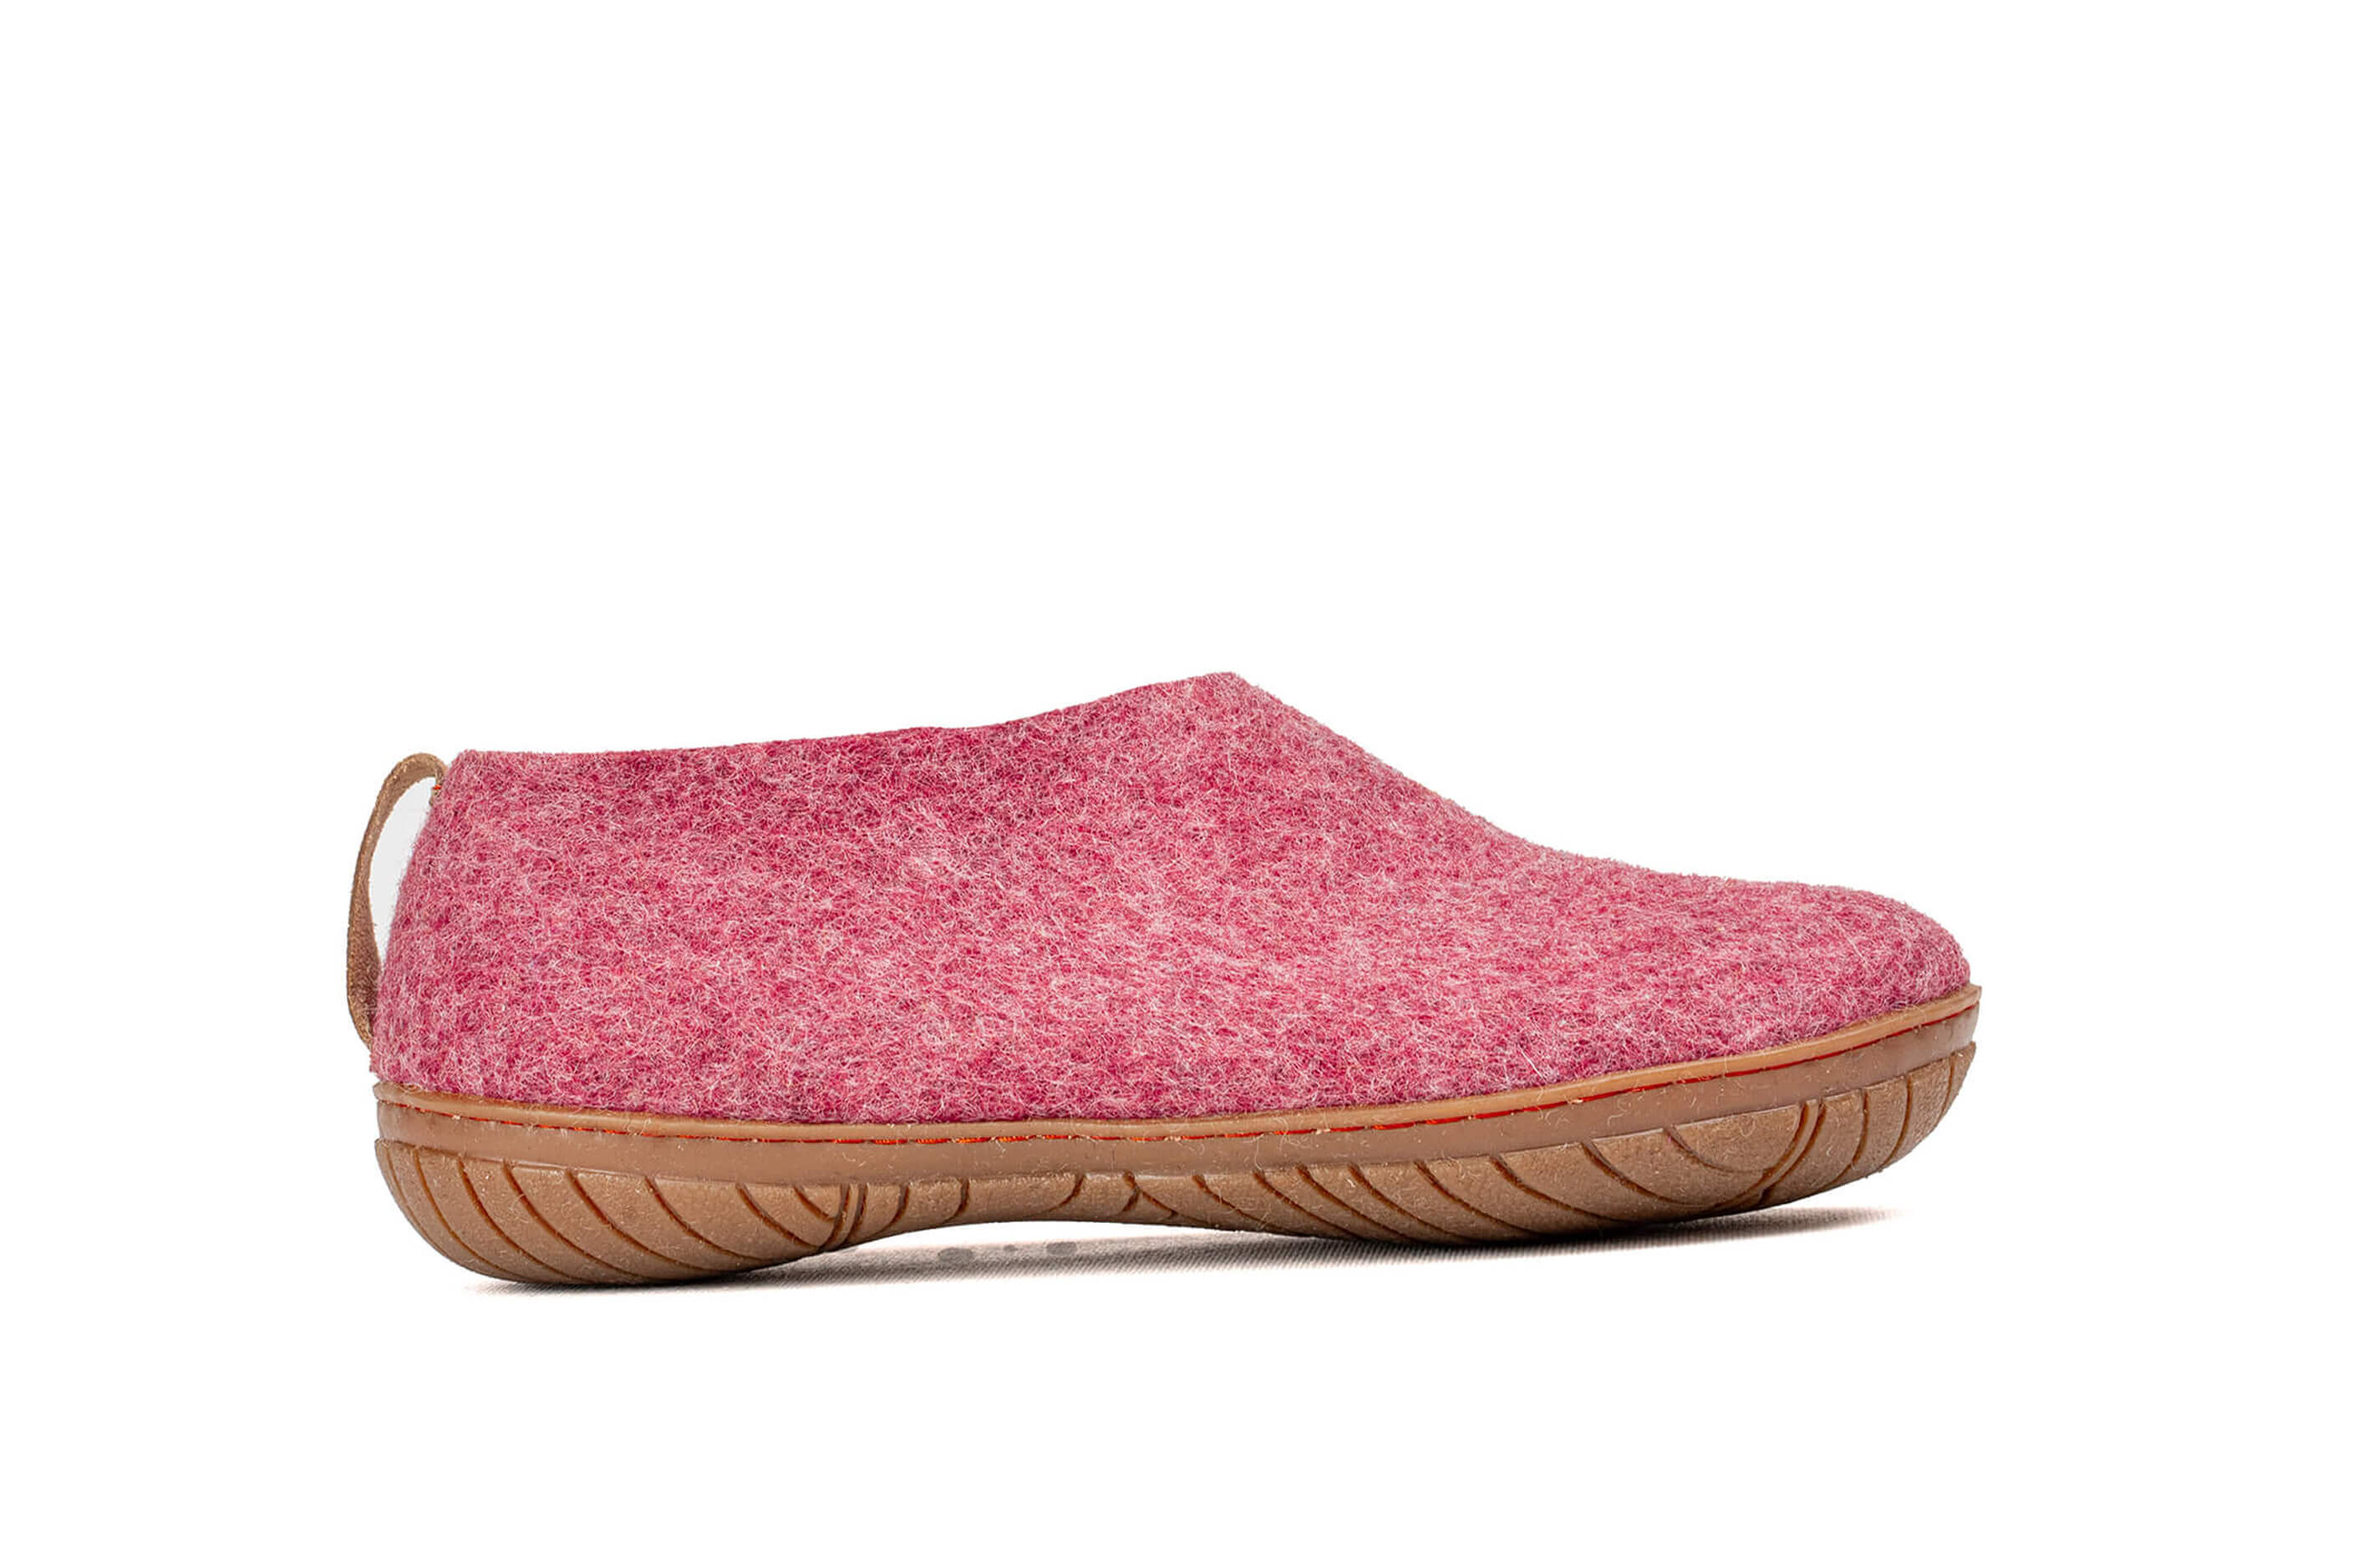 Outdoor Shoes With Rubber Sole - Cherry Pink